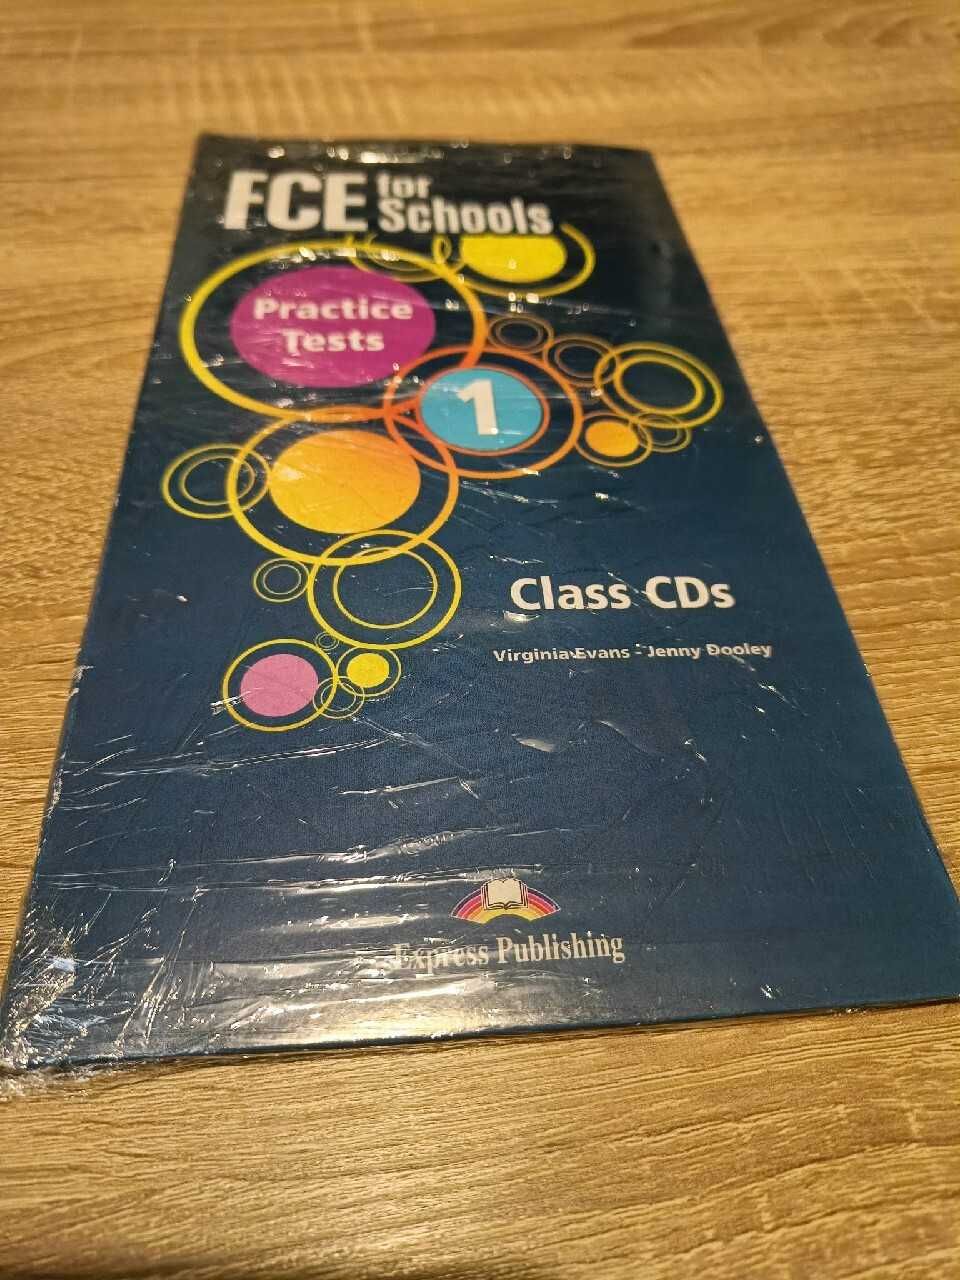 FCE for schools Practice tests 1 class CDs